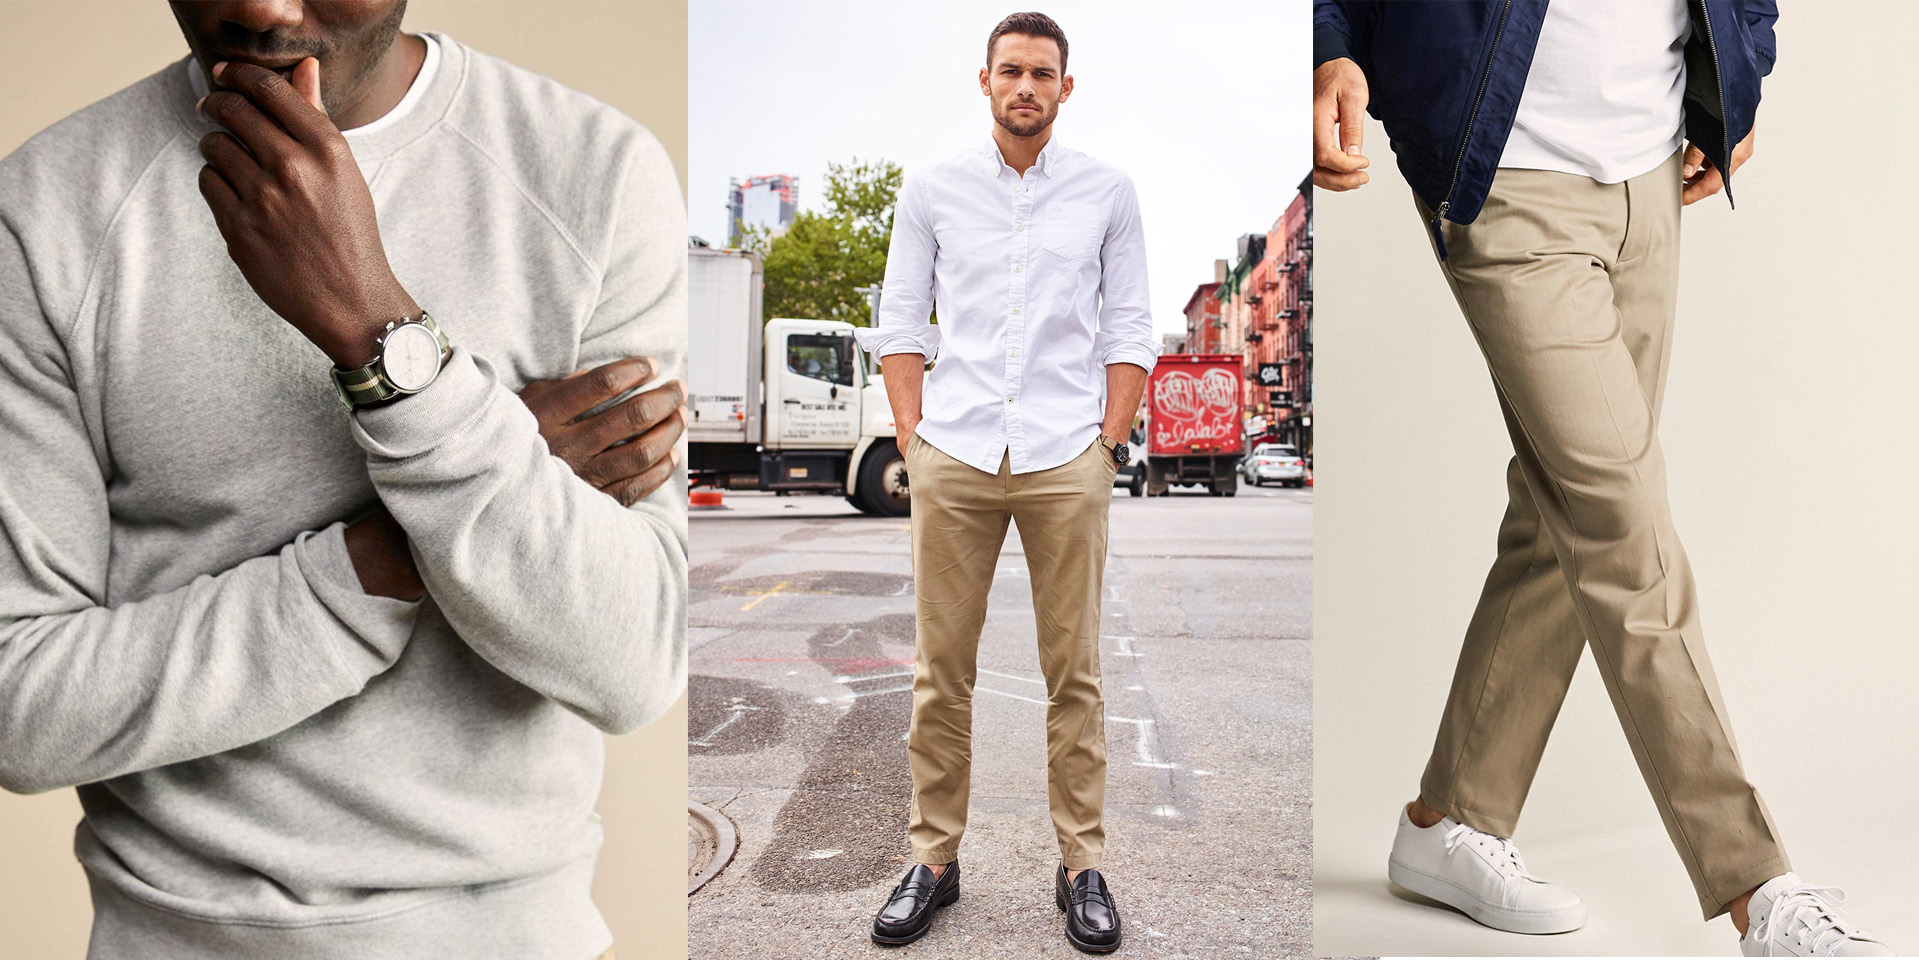 Dockers Factory Sale offers up to 75% off select styles from just $10 ...